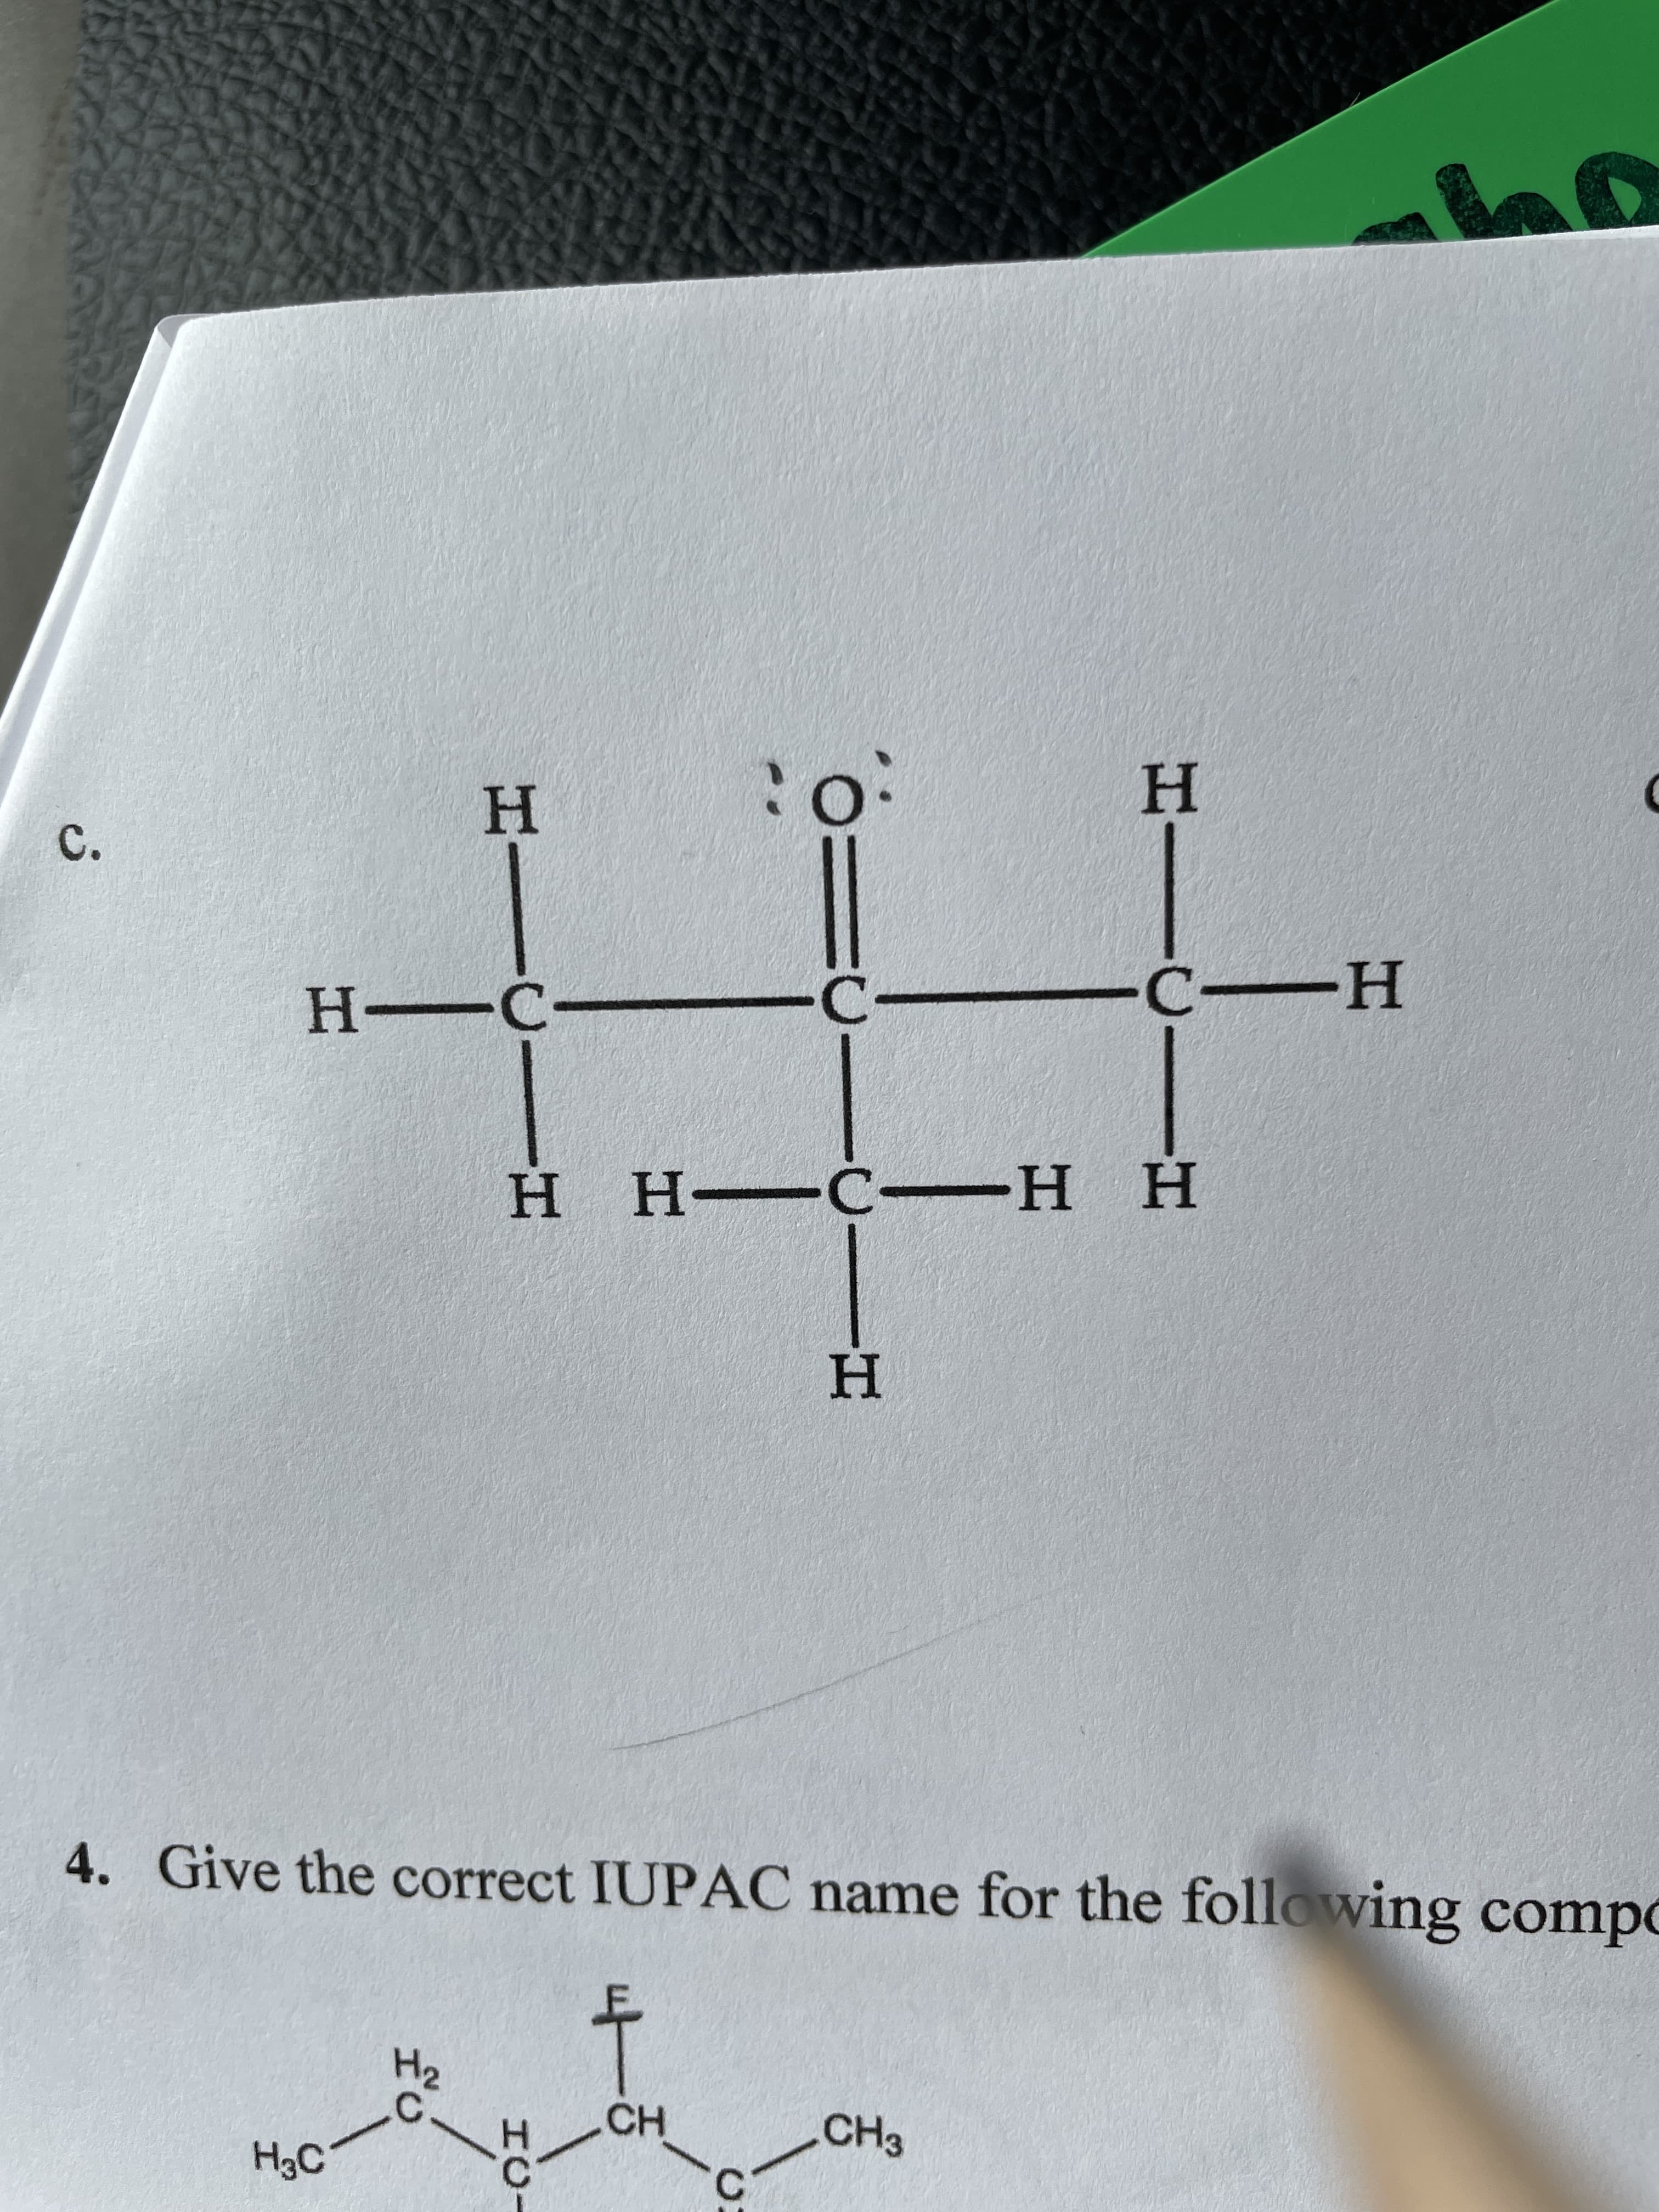 HI
:-
HCI
C.
CH
CH3
4. Give the correct IUPAC name for the following compo
H.
H H-
н н— —н н
H-
C.
H.
C.
